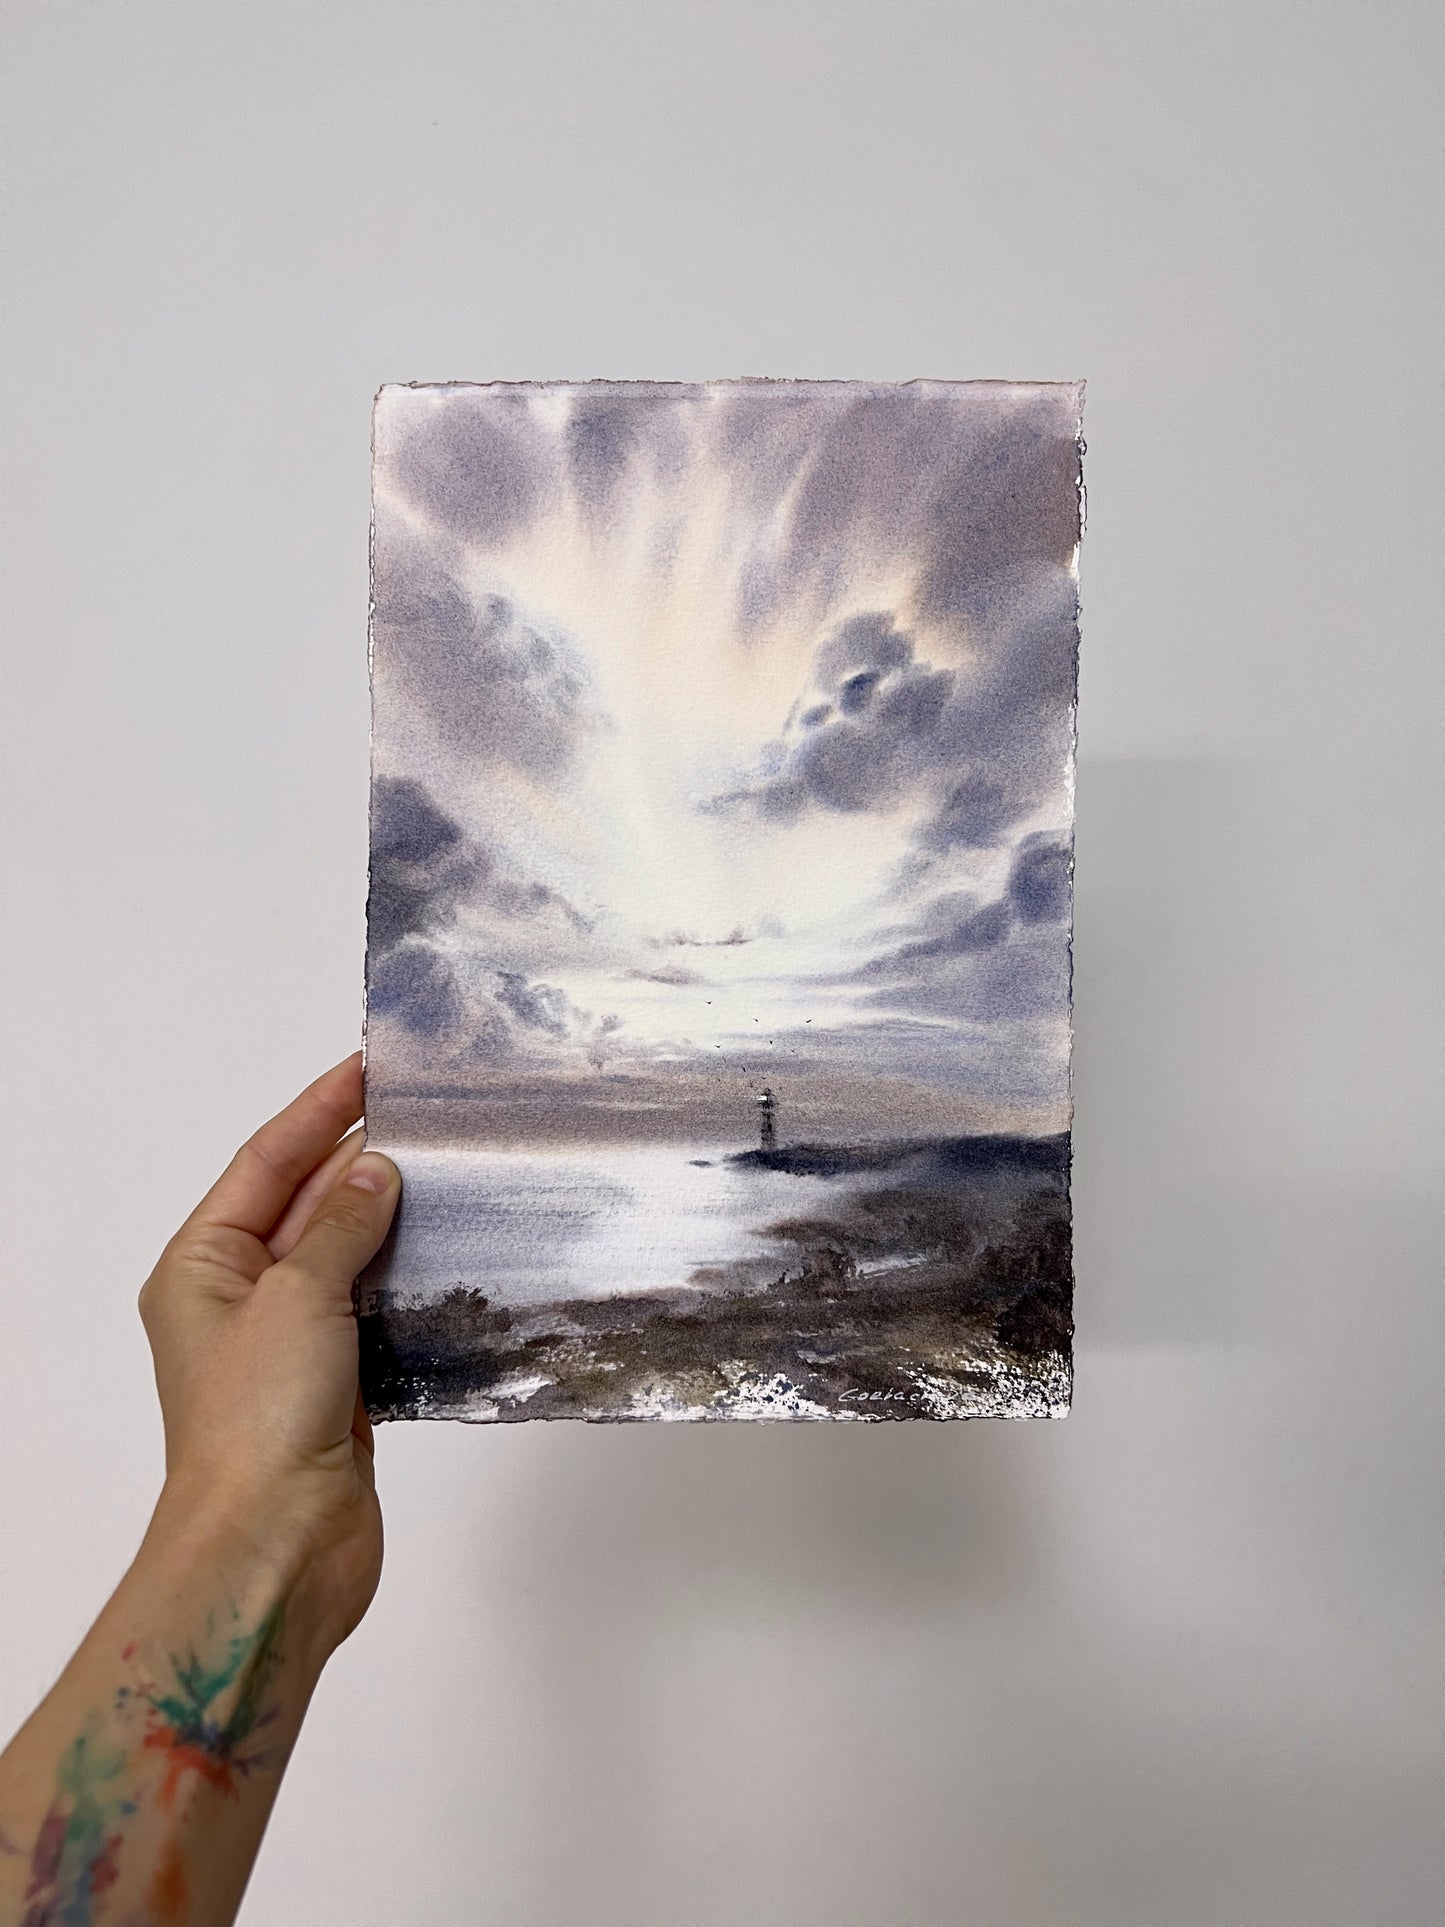 Painting Watercolor Original, Serene Maritime Art "Lighthouse in the clouds" - Small Art Piece for Home Decor, Perfect Gift for Nautical Enthusiasts